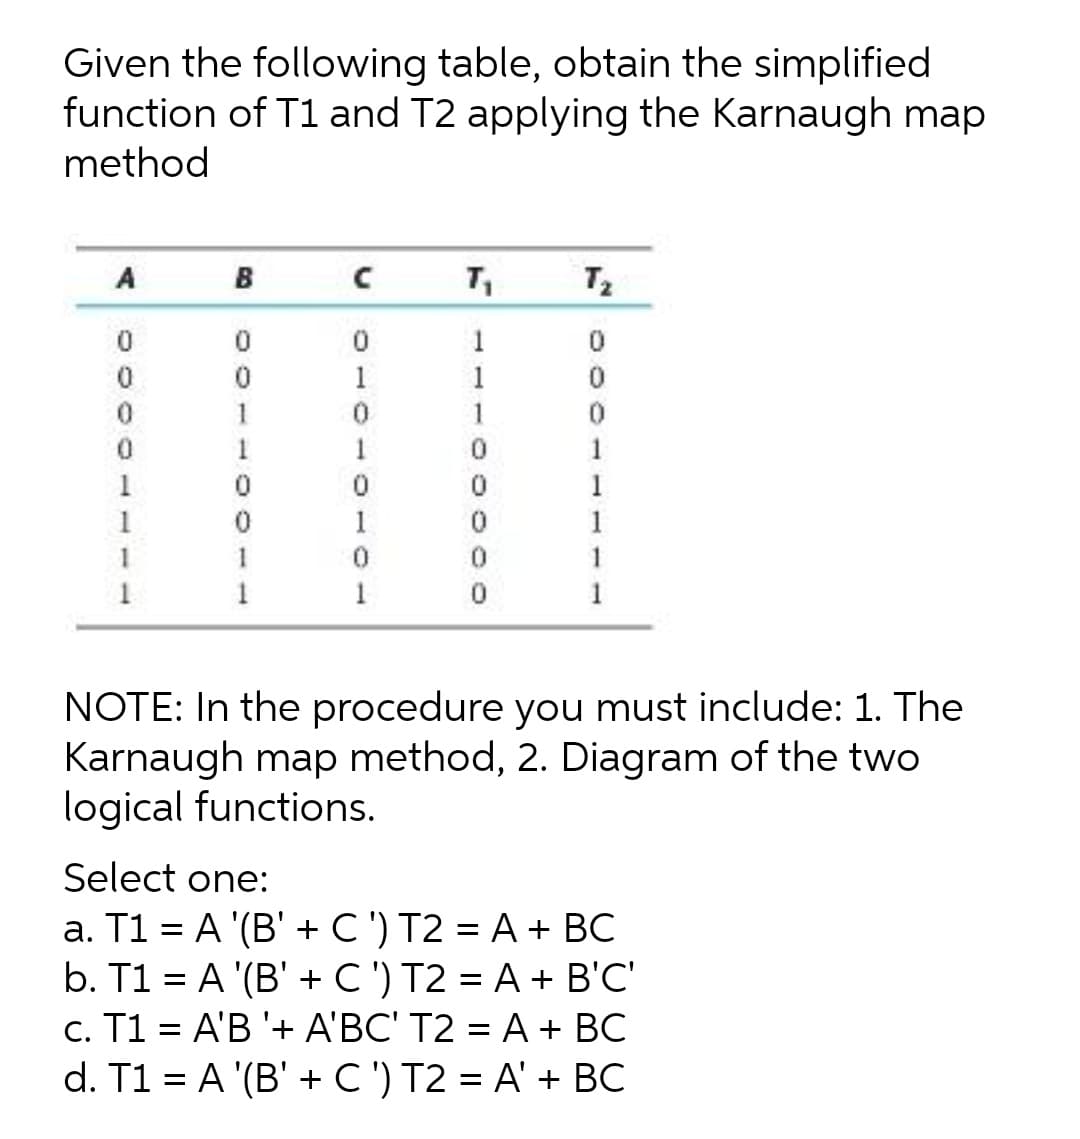 Given the following table, obtain the simplified
function of T1 and T2 applying the Karnaugh map
method
A
B C
T2
1
1
1
1
1
1
1
1
1
1
1
1
1
1
1
1
NOTE: In the procedure you must include: 1. The
Karnaugh map method, 2. Diagram of the two
logical functions.
Select one:
a. T1 = A '(B' + C') T2 = A + BC
b. T1 = A '(B' + C ') T2 = A + B'C'
c. T1 = A'B '+ A'BC' T2 = A + BC
d. T1 = A '(B' + C ') T2 = A' + BC
||
0000
